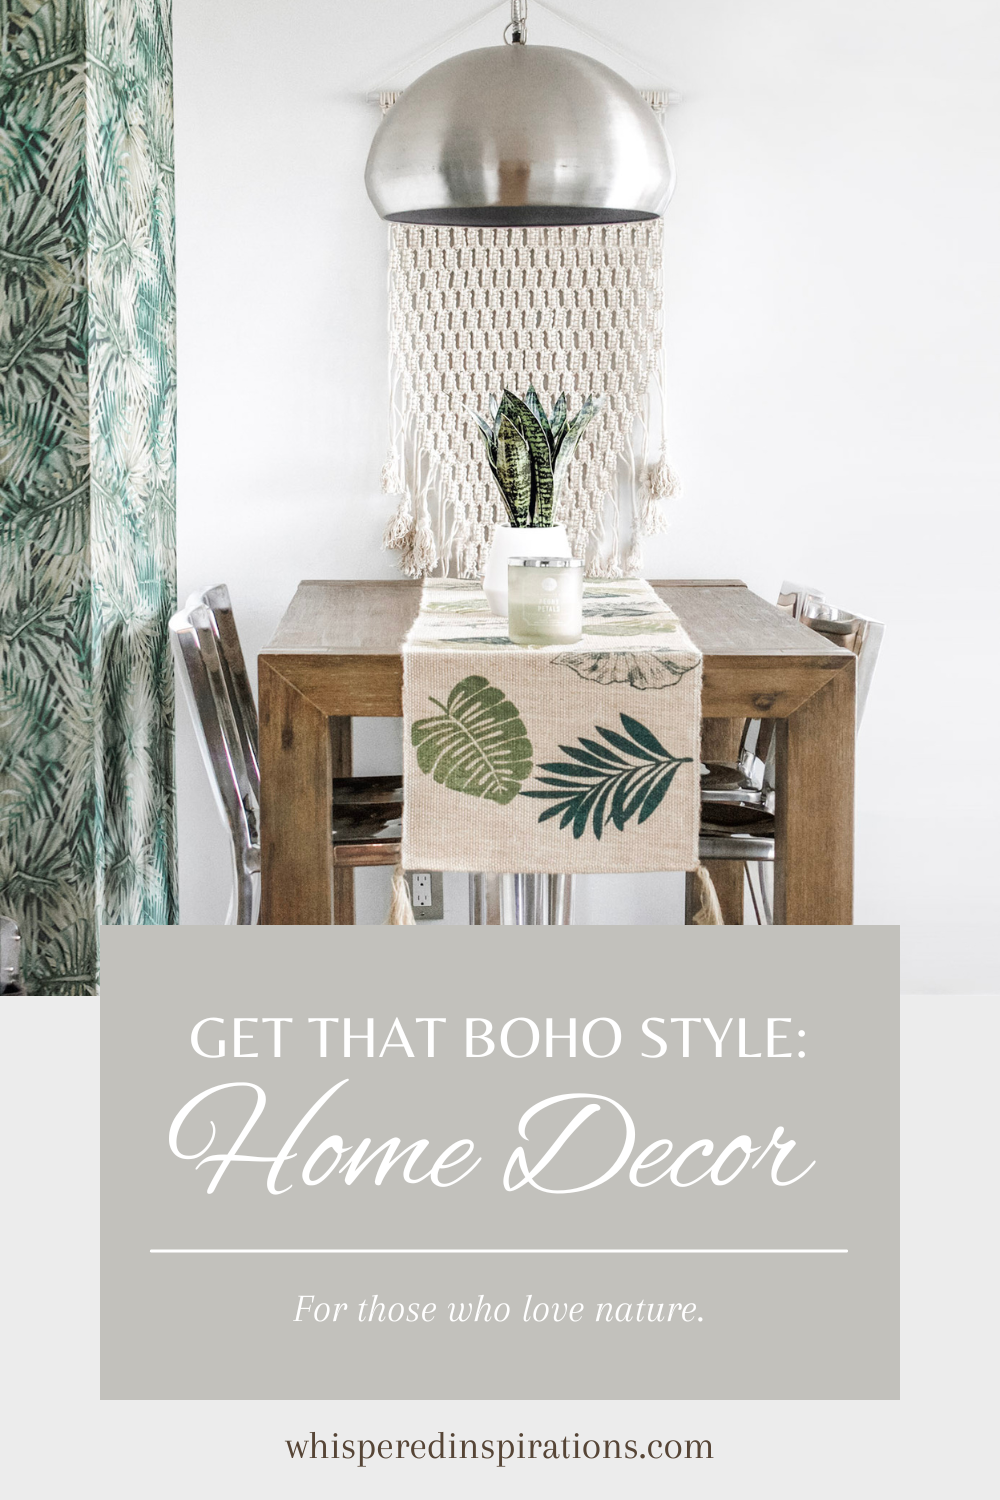 A beautiful boho kitchen with a dining room table. Has green florals and warm tones. This article covers how to get that boho style for those that love nature.